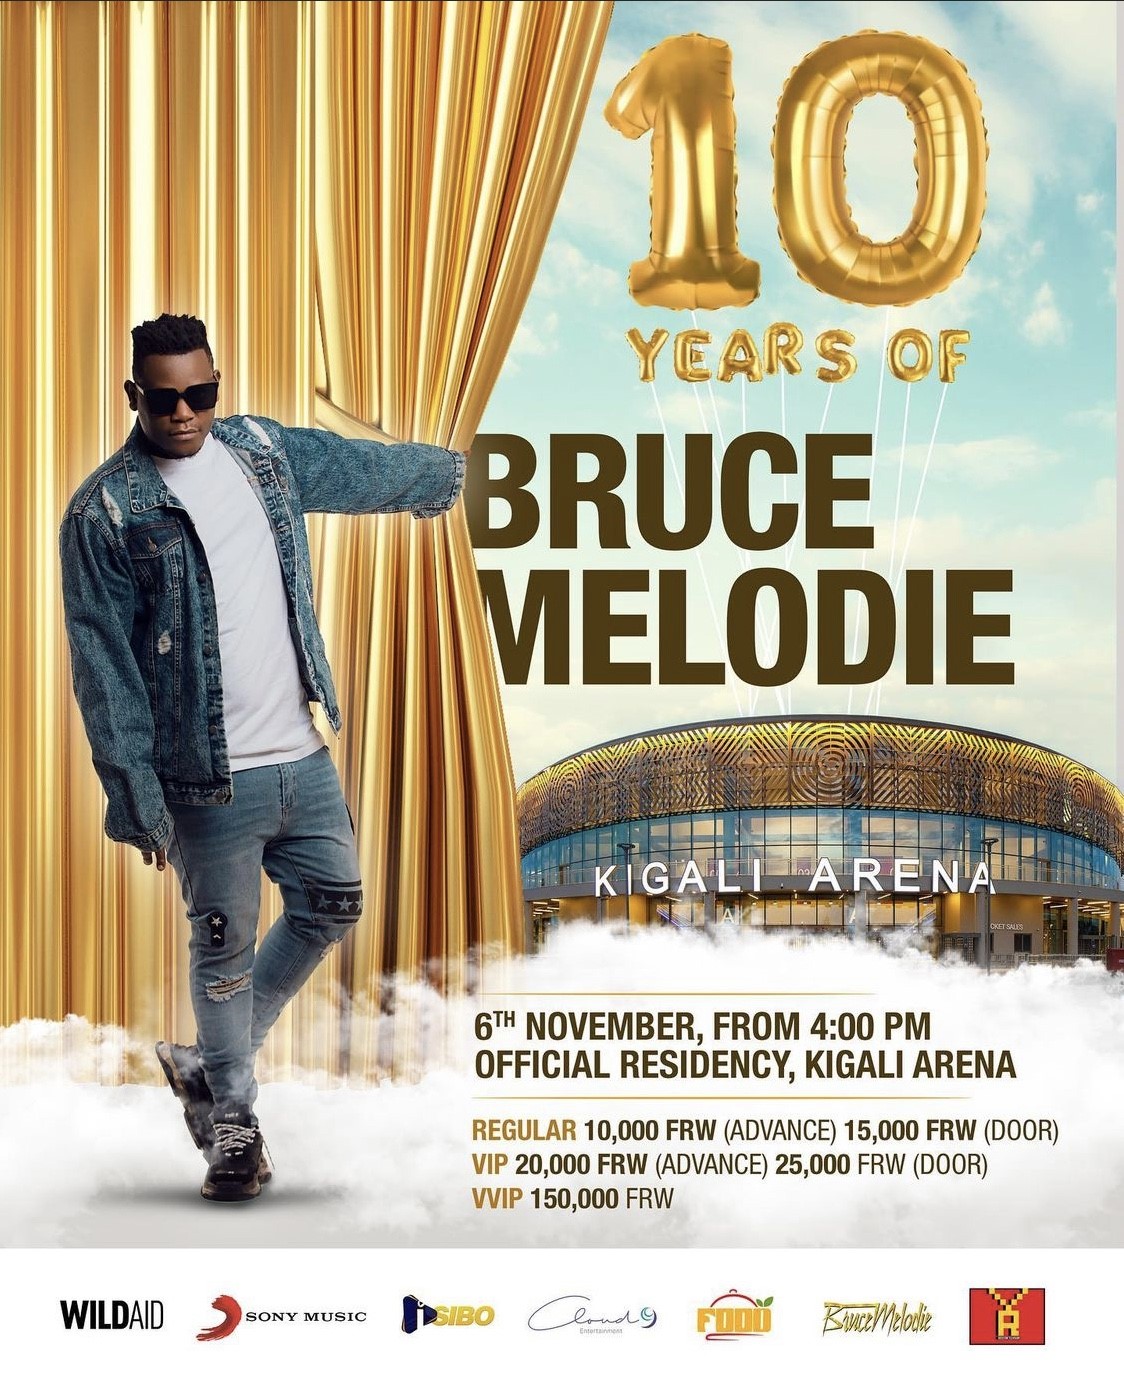 Bruce Melodie 10 years poster